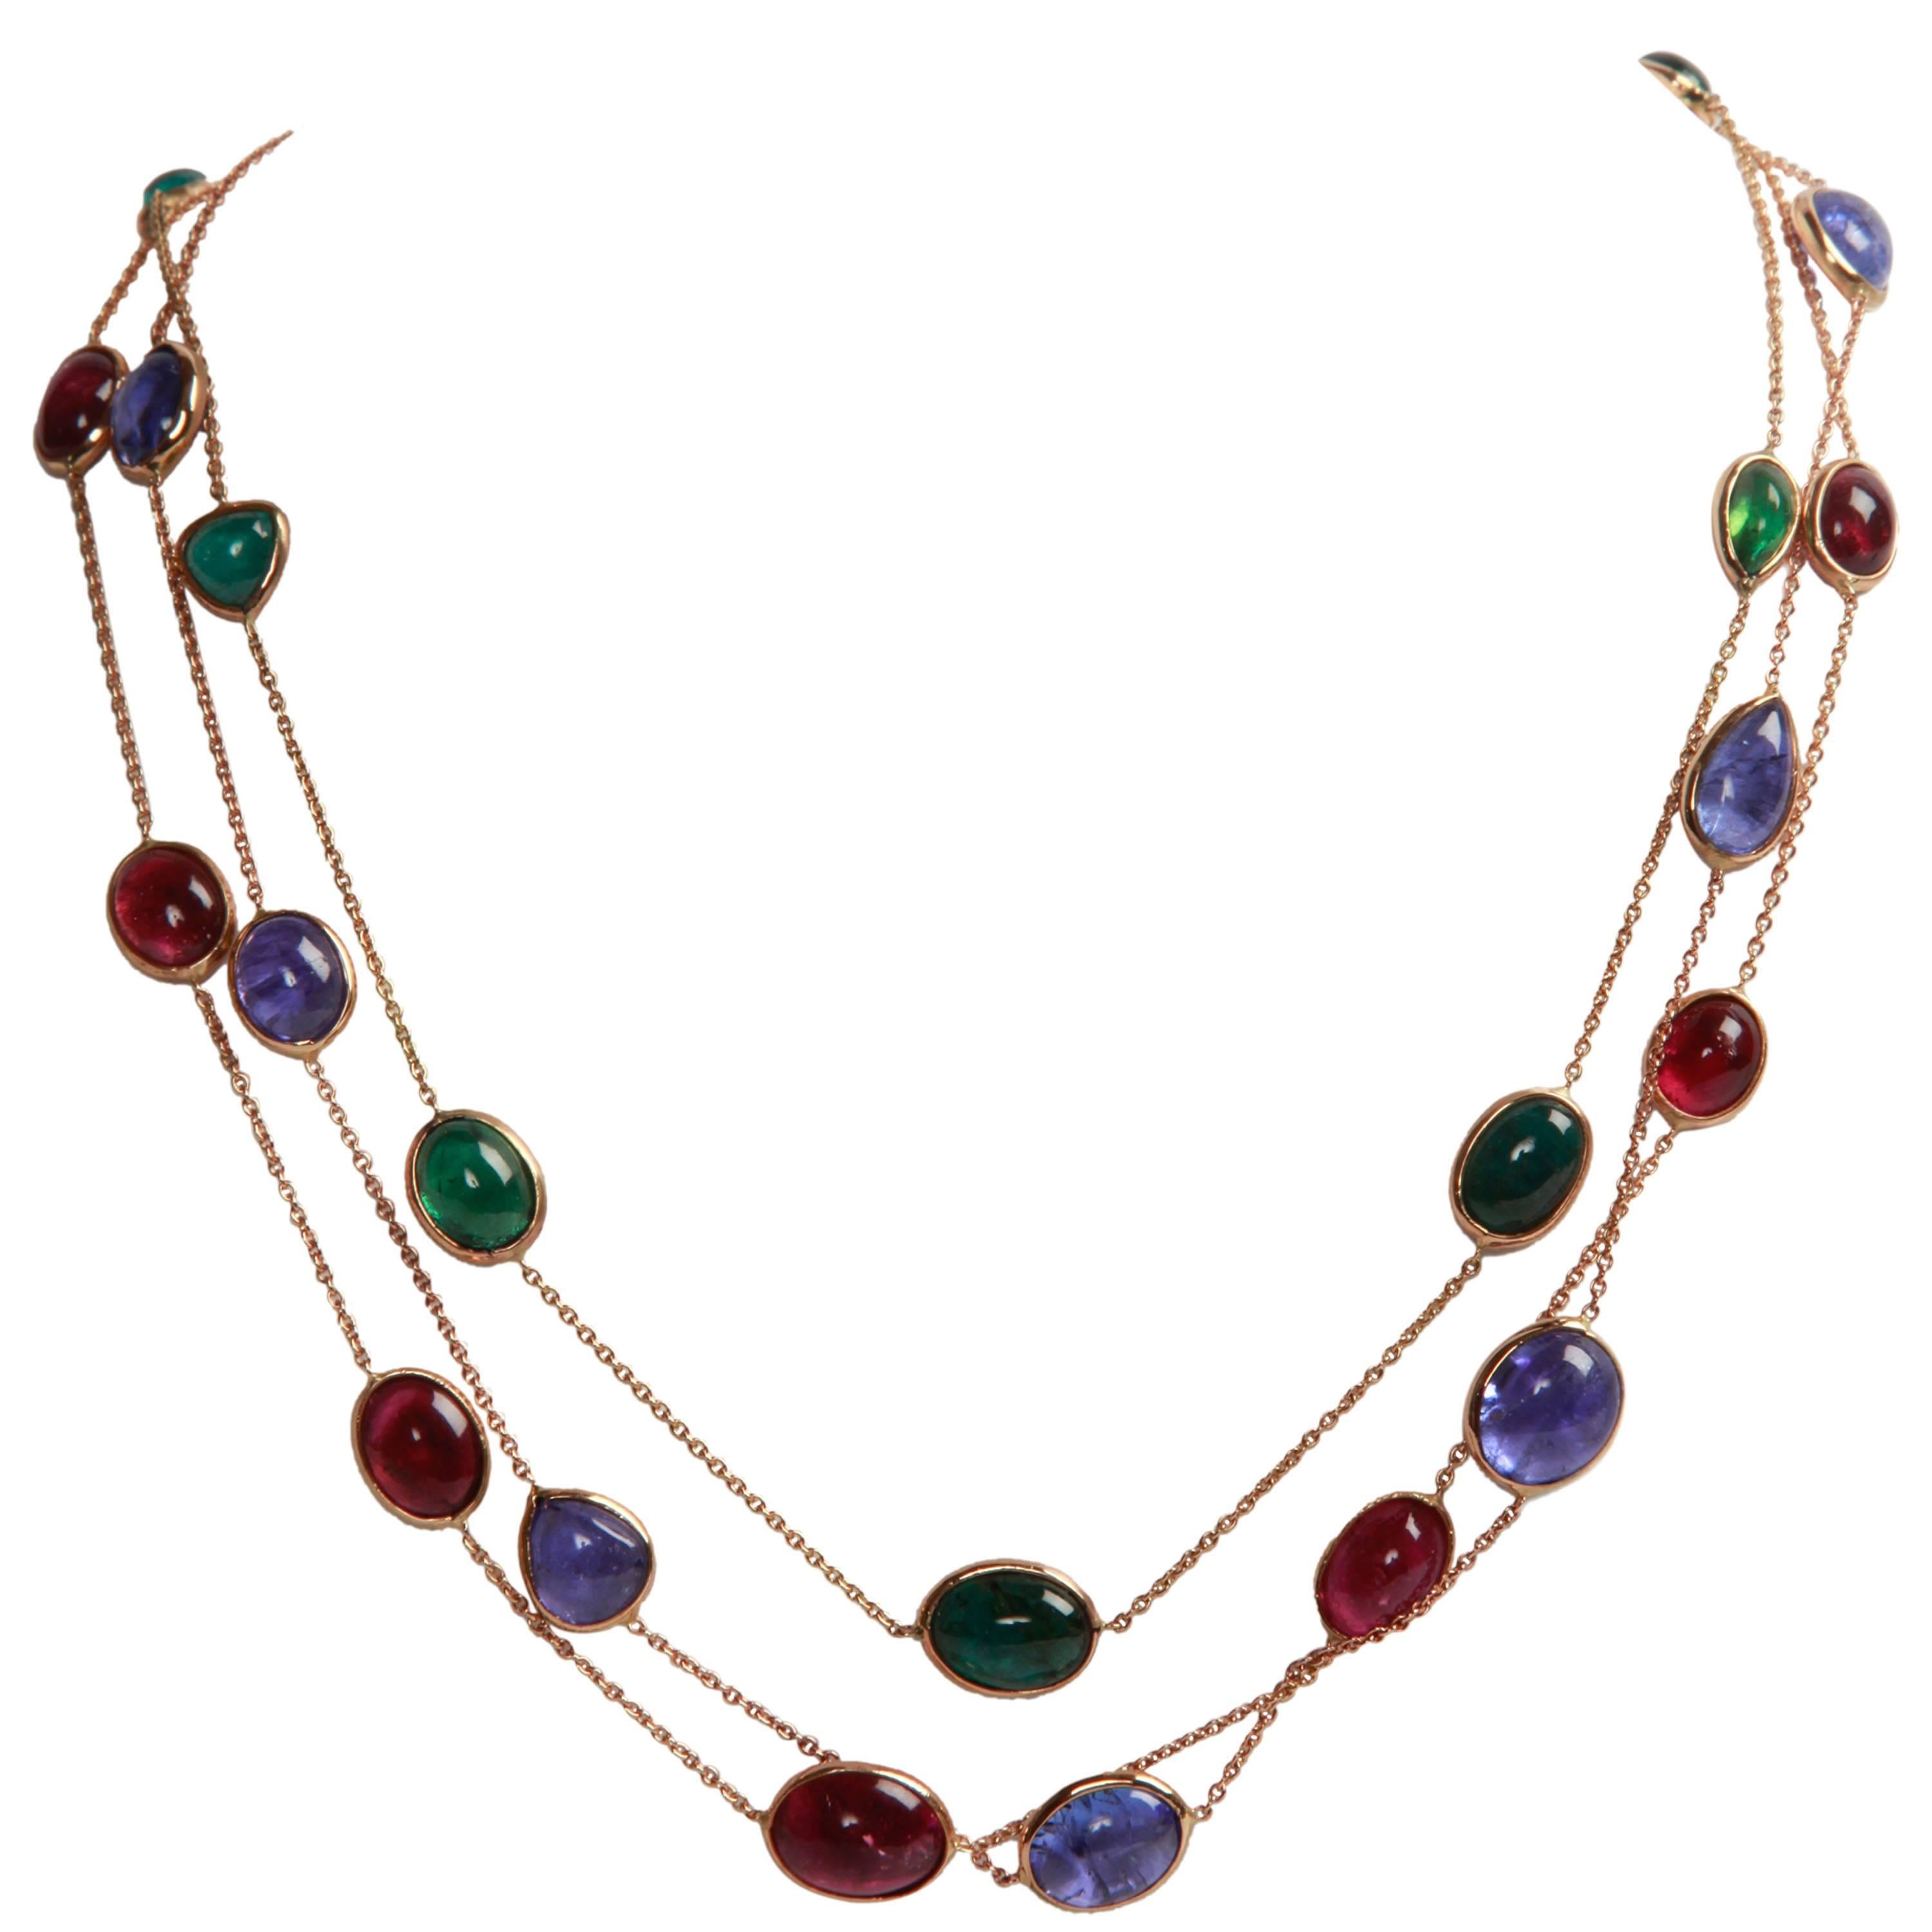 18 K Yellow Gold Necklaces with Tourmalines and Tanzanite Cabochons